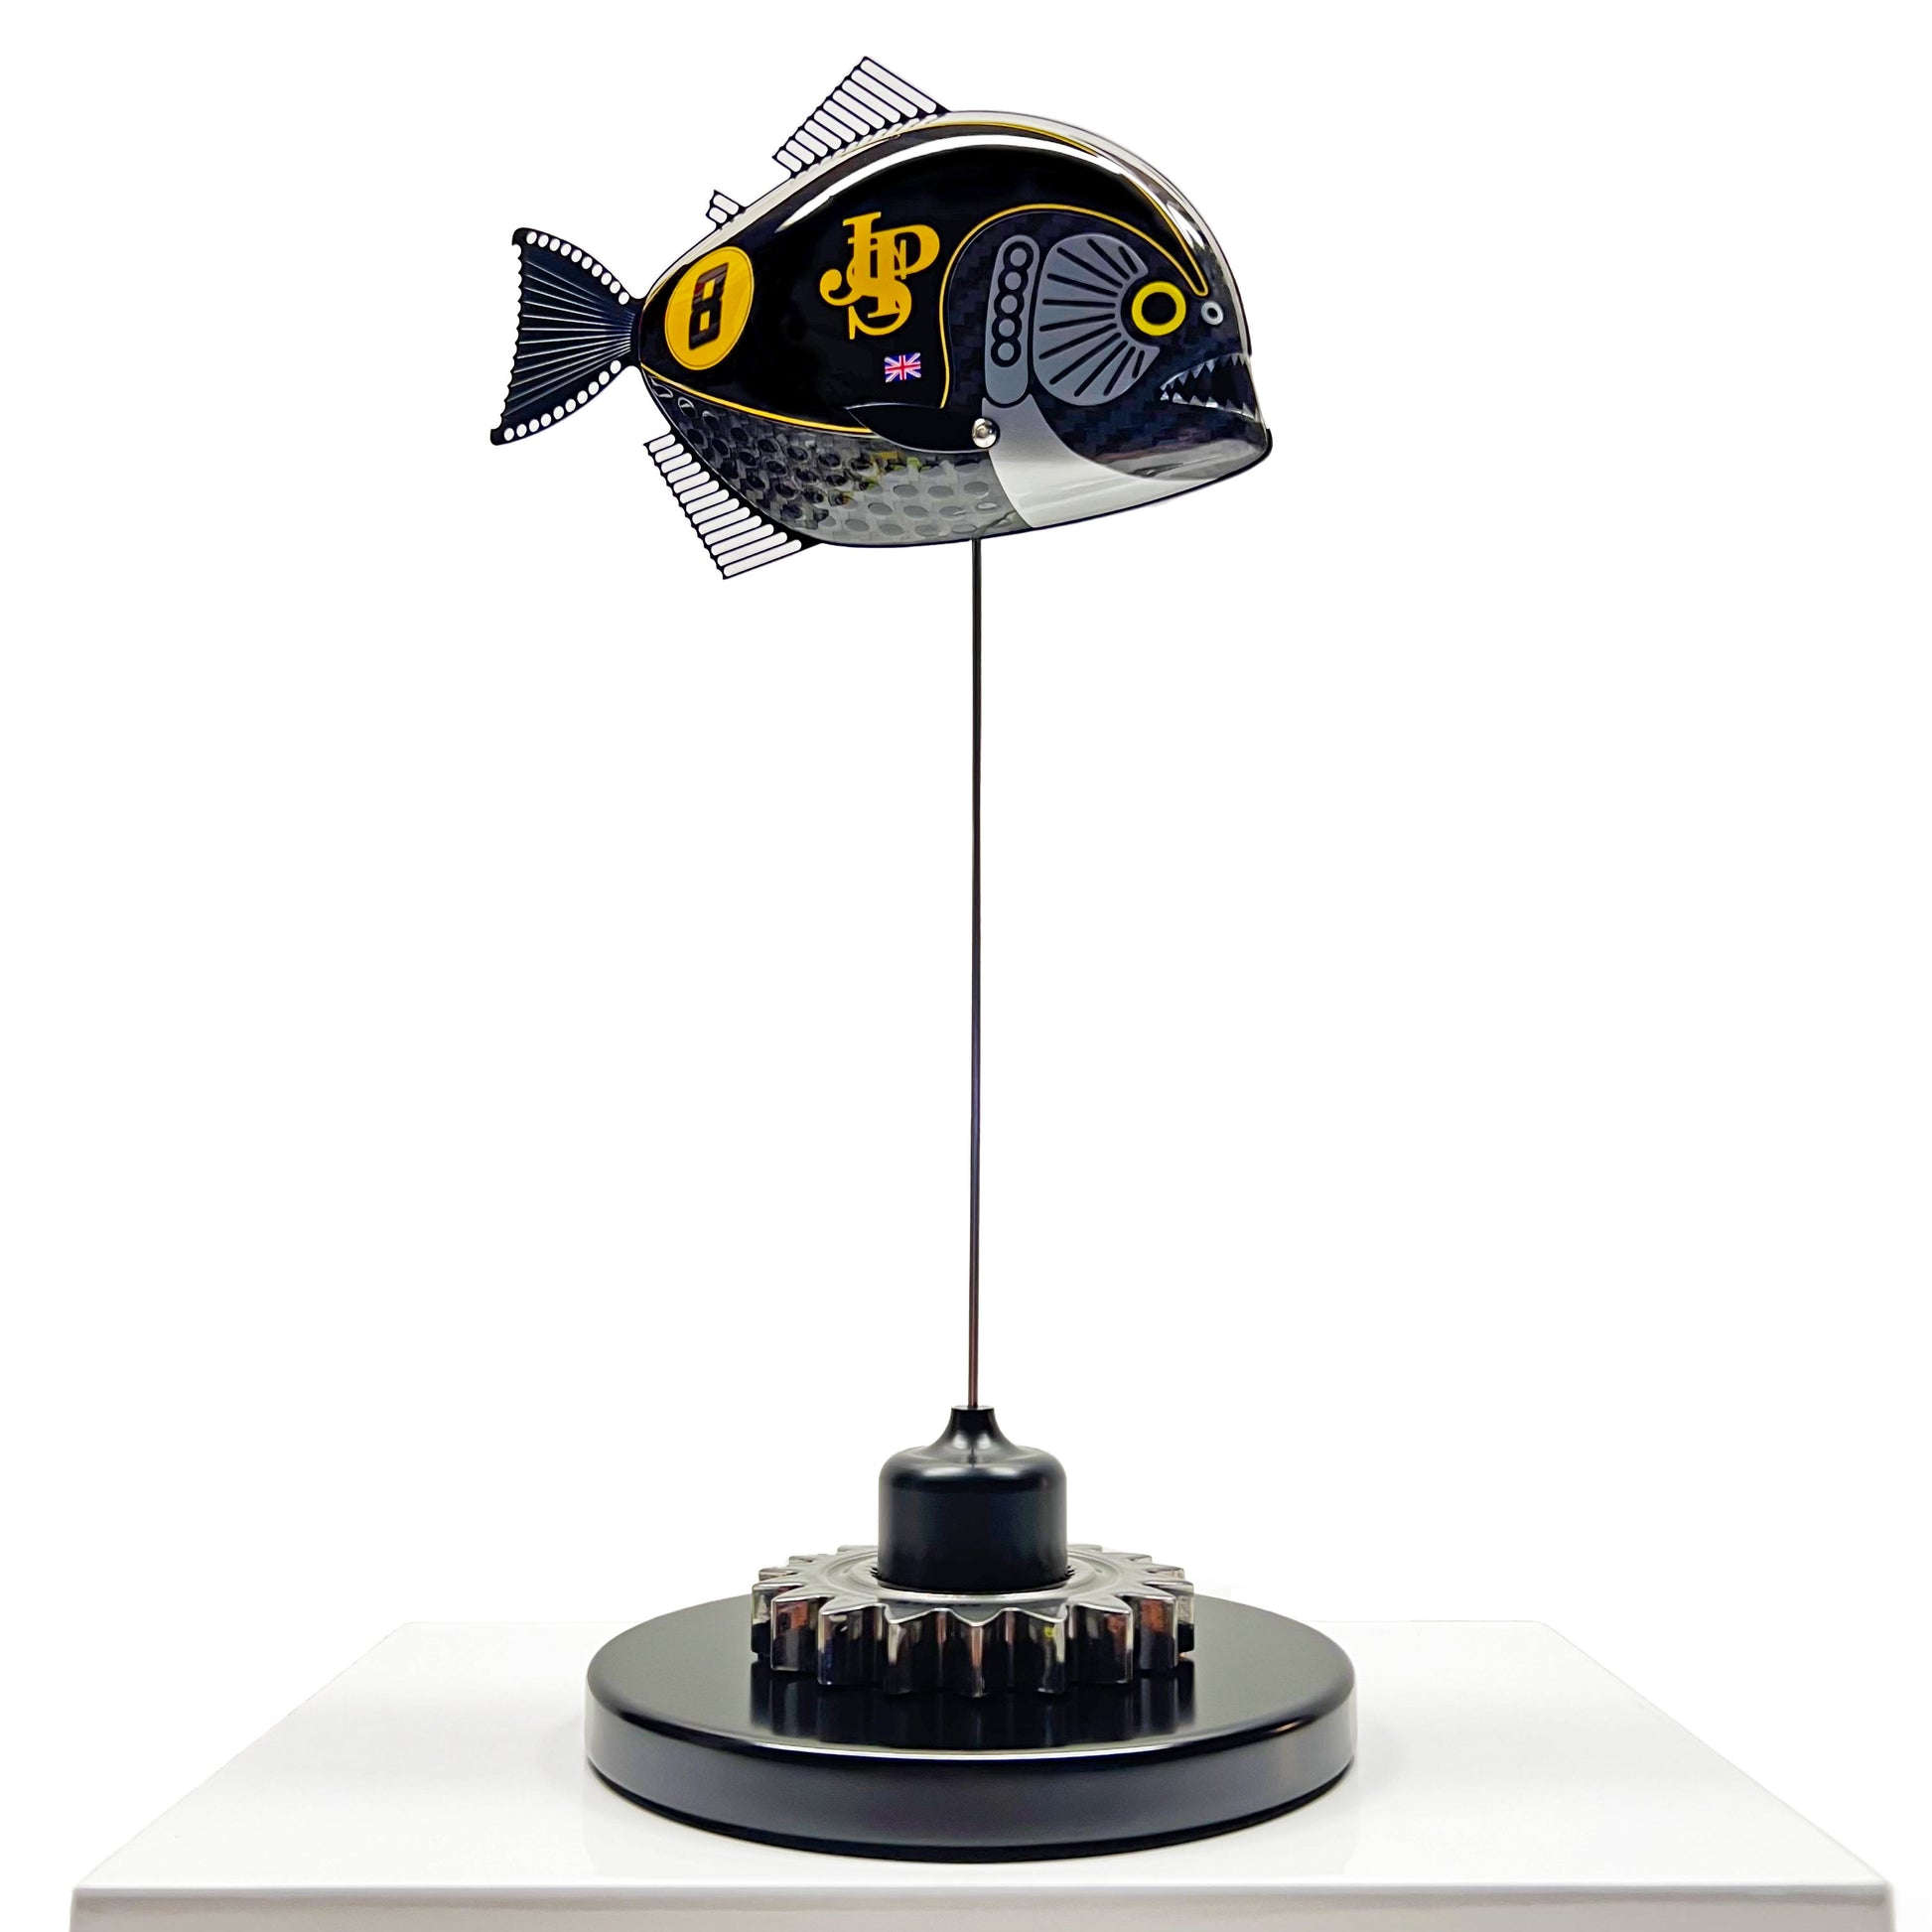 Carbon fibre Piranha sculpture with JPS livery on a black base with F1 gear